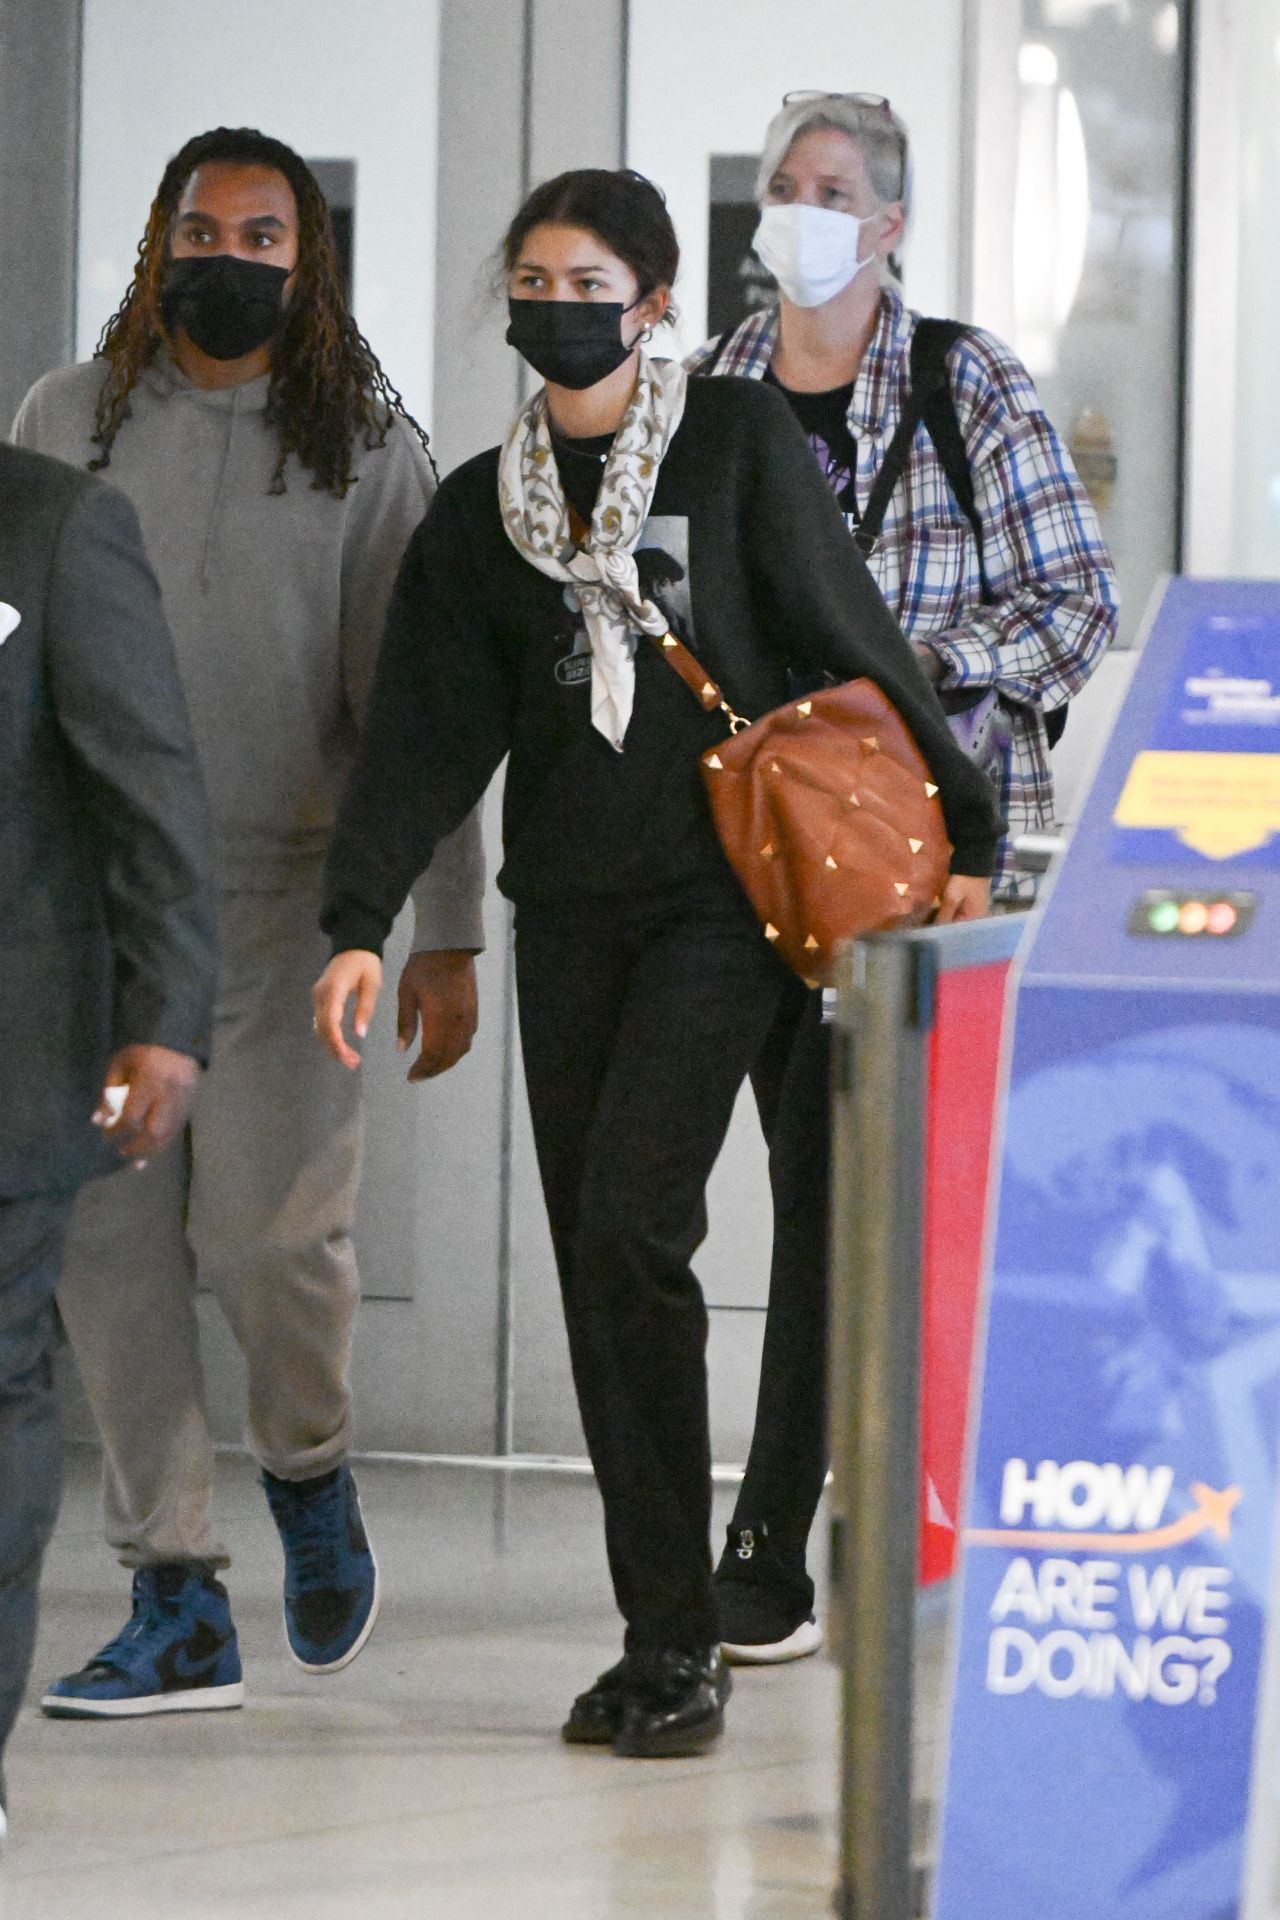 Zendaya arrives in a red hoodie at JFK Airport in New York City